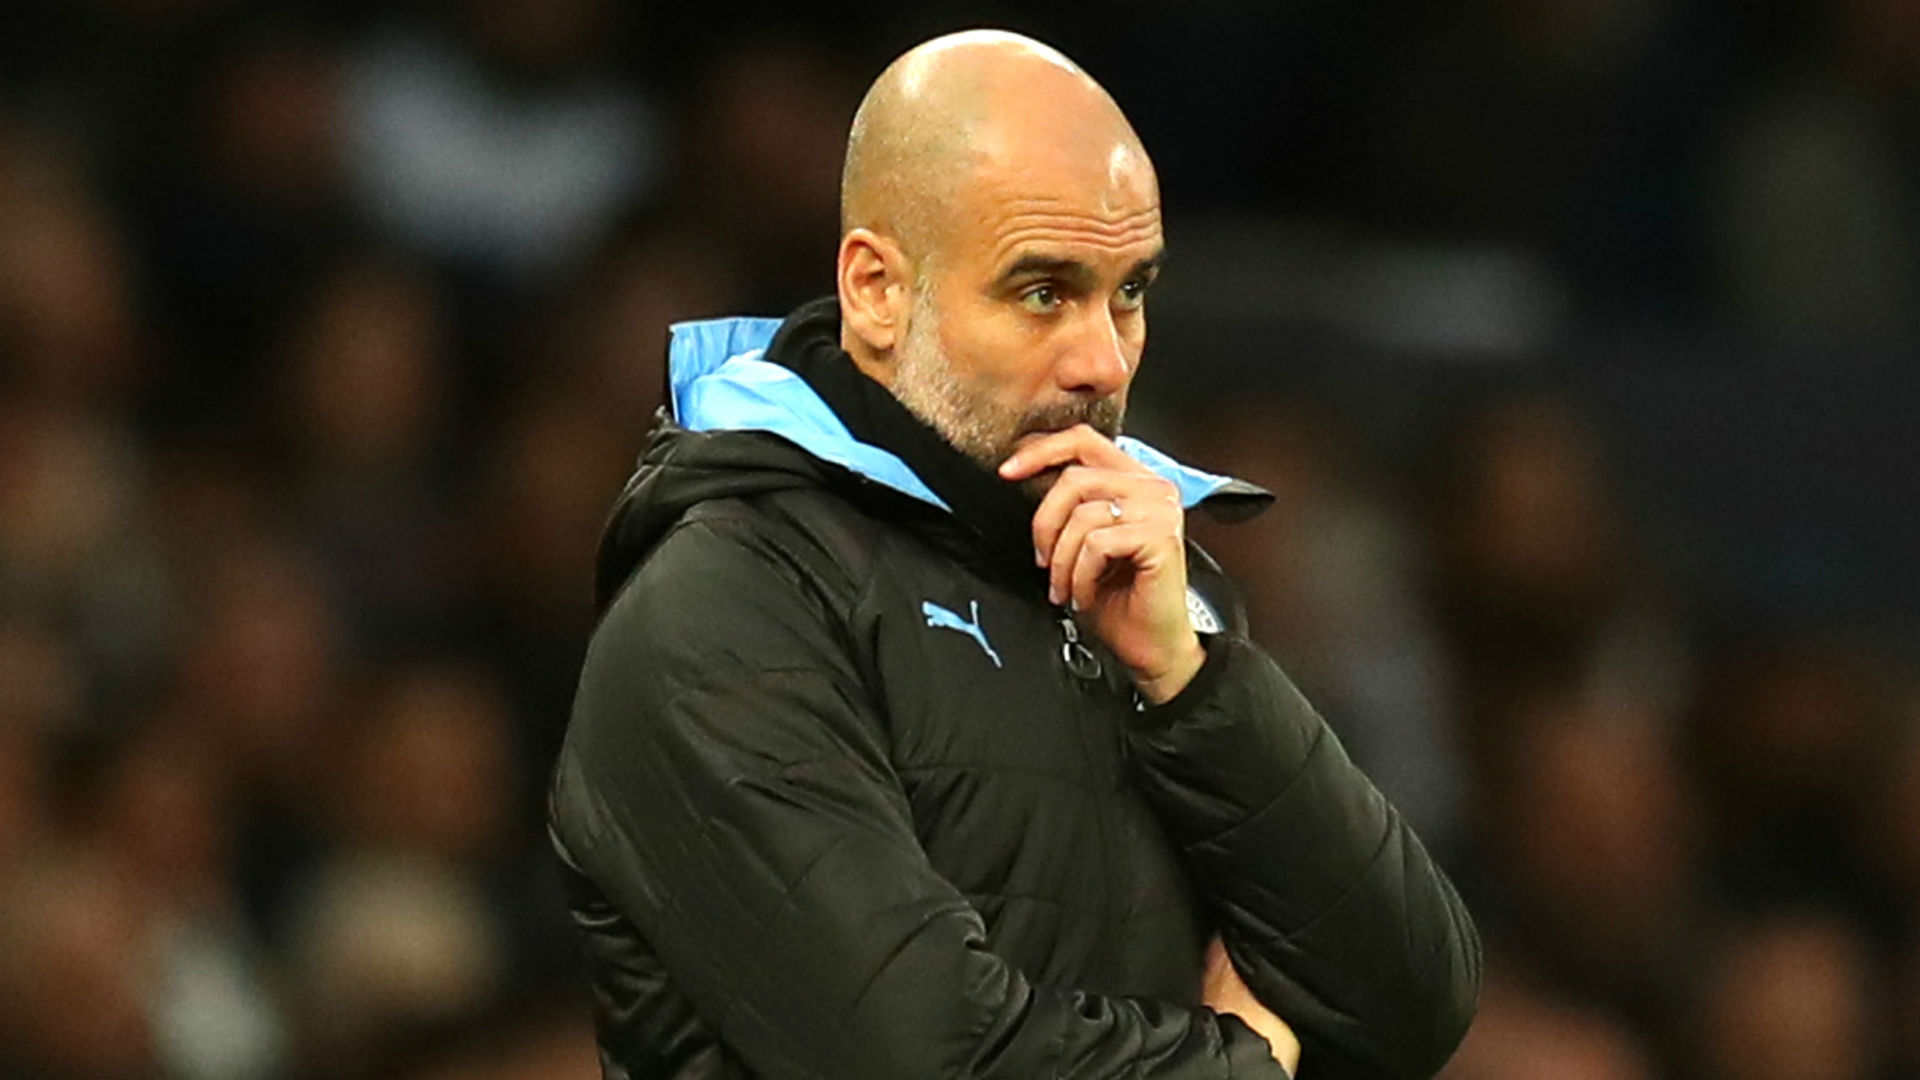 Having been handed a Champions League ban, Manchester City could lose manager Pep Guardiola.